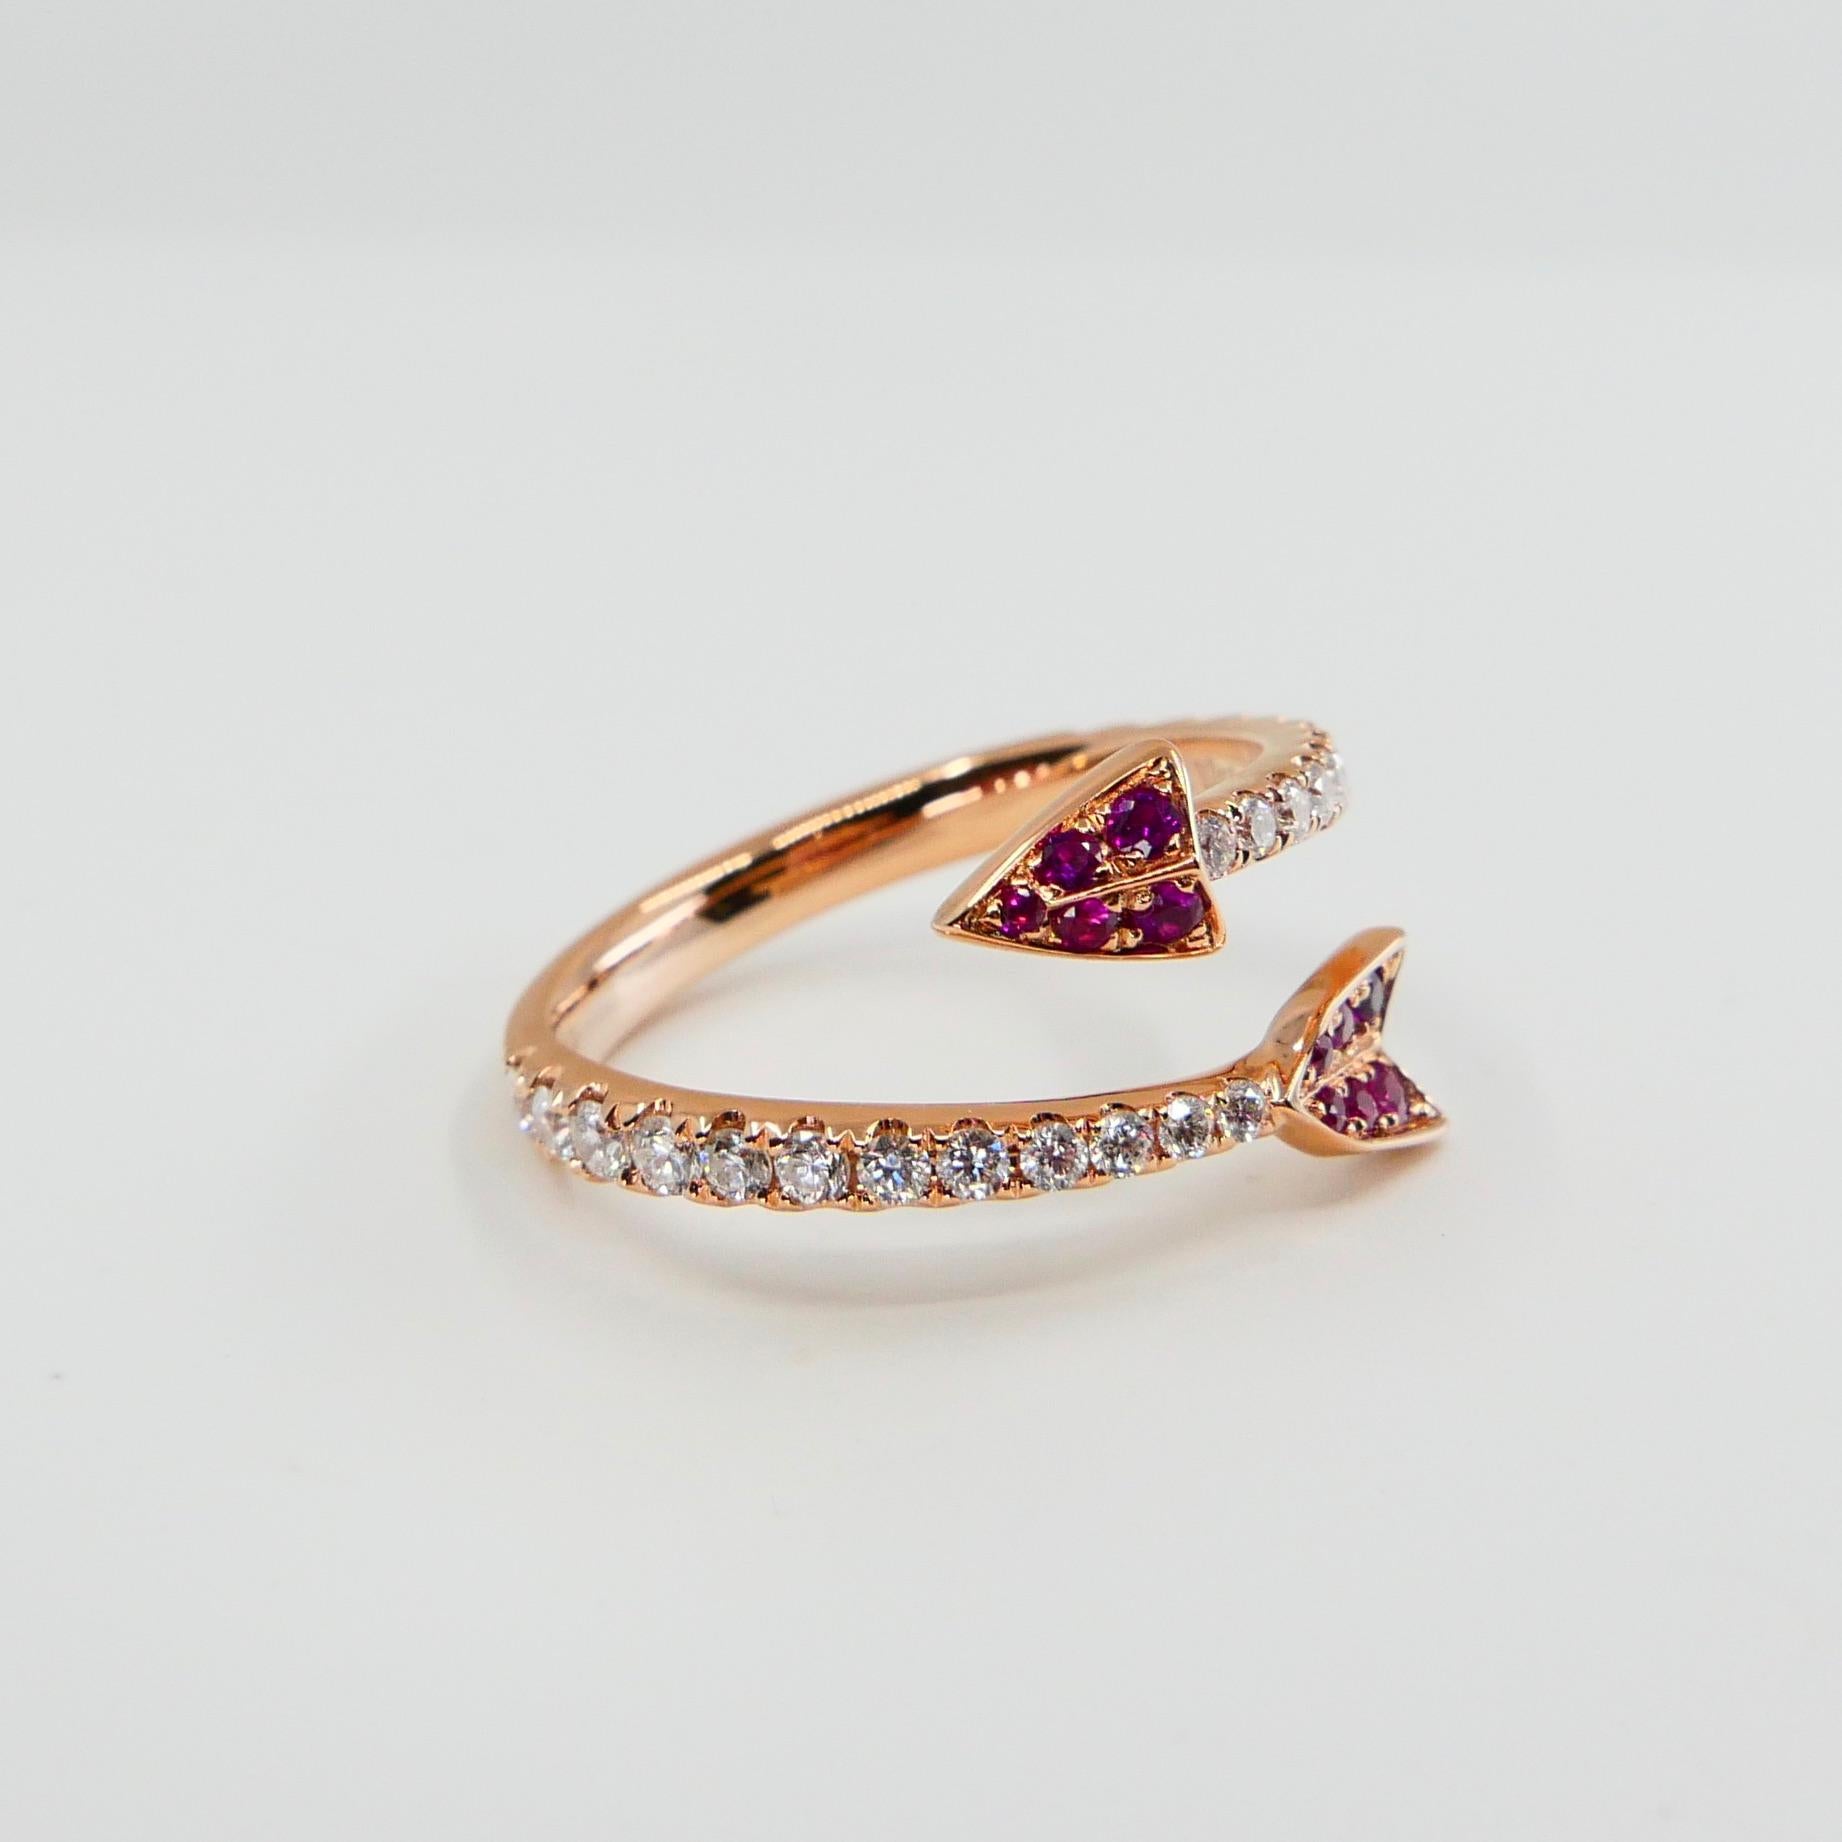 18 Karat Rose Gold Burma Red Rubies and Diamond Band Ring, Cupid's Arrow For Sale 6